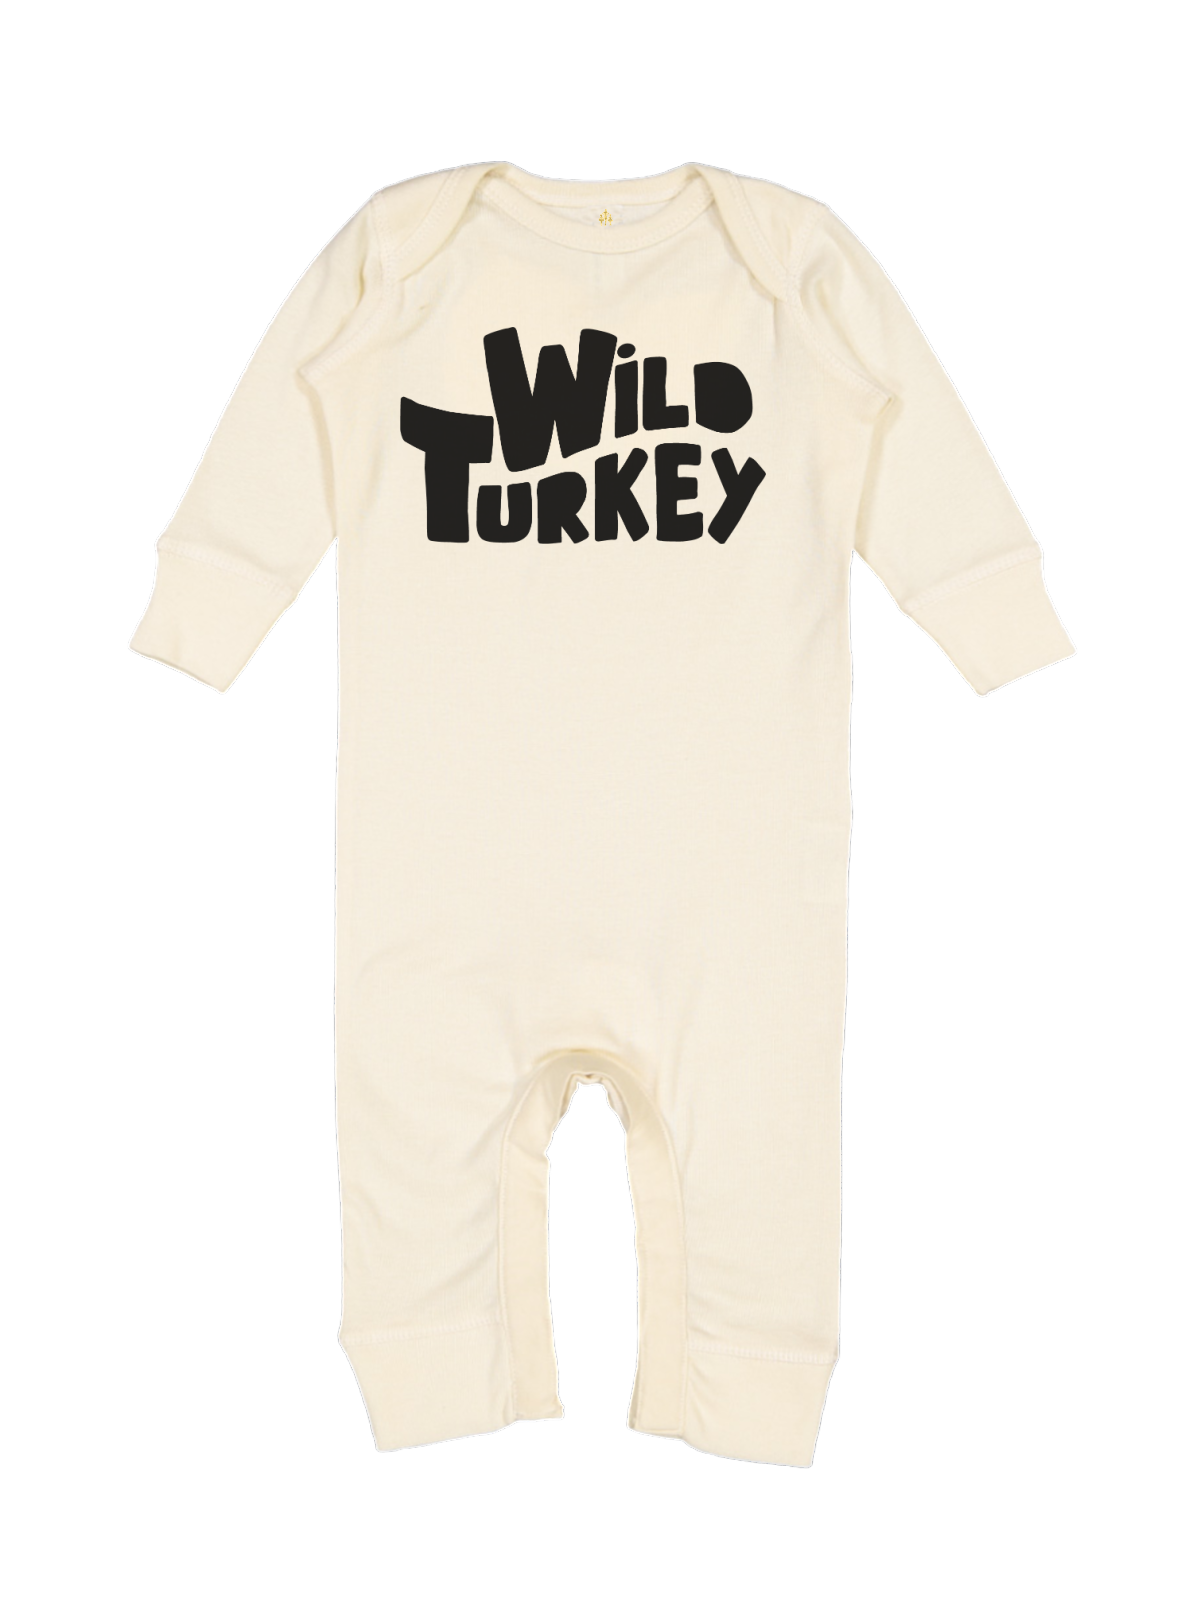 Wild Turkey Baby Thanksgiving Day Outfit Romper One Piece in Black